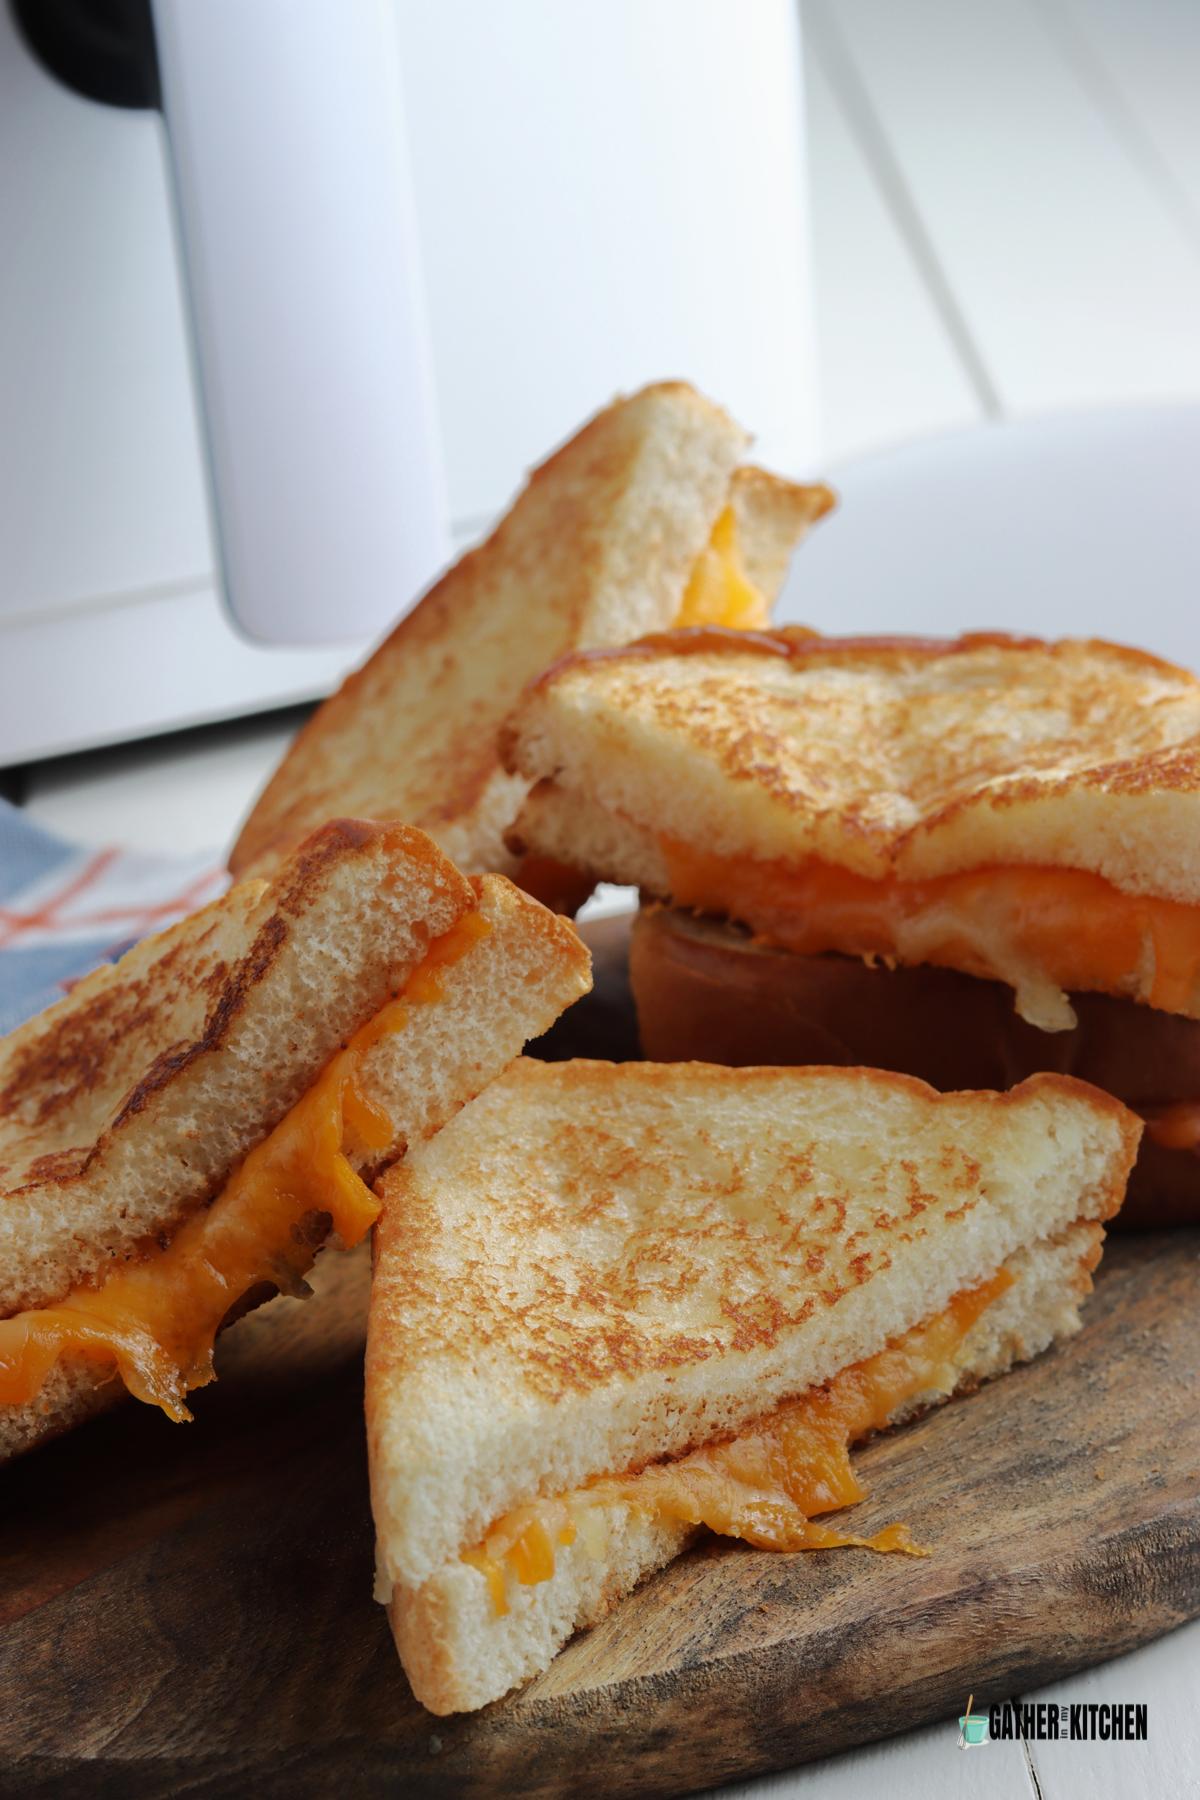 5 halves of air fryer grilled cheese sandwiches on a cutting board.